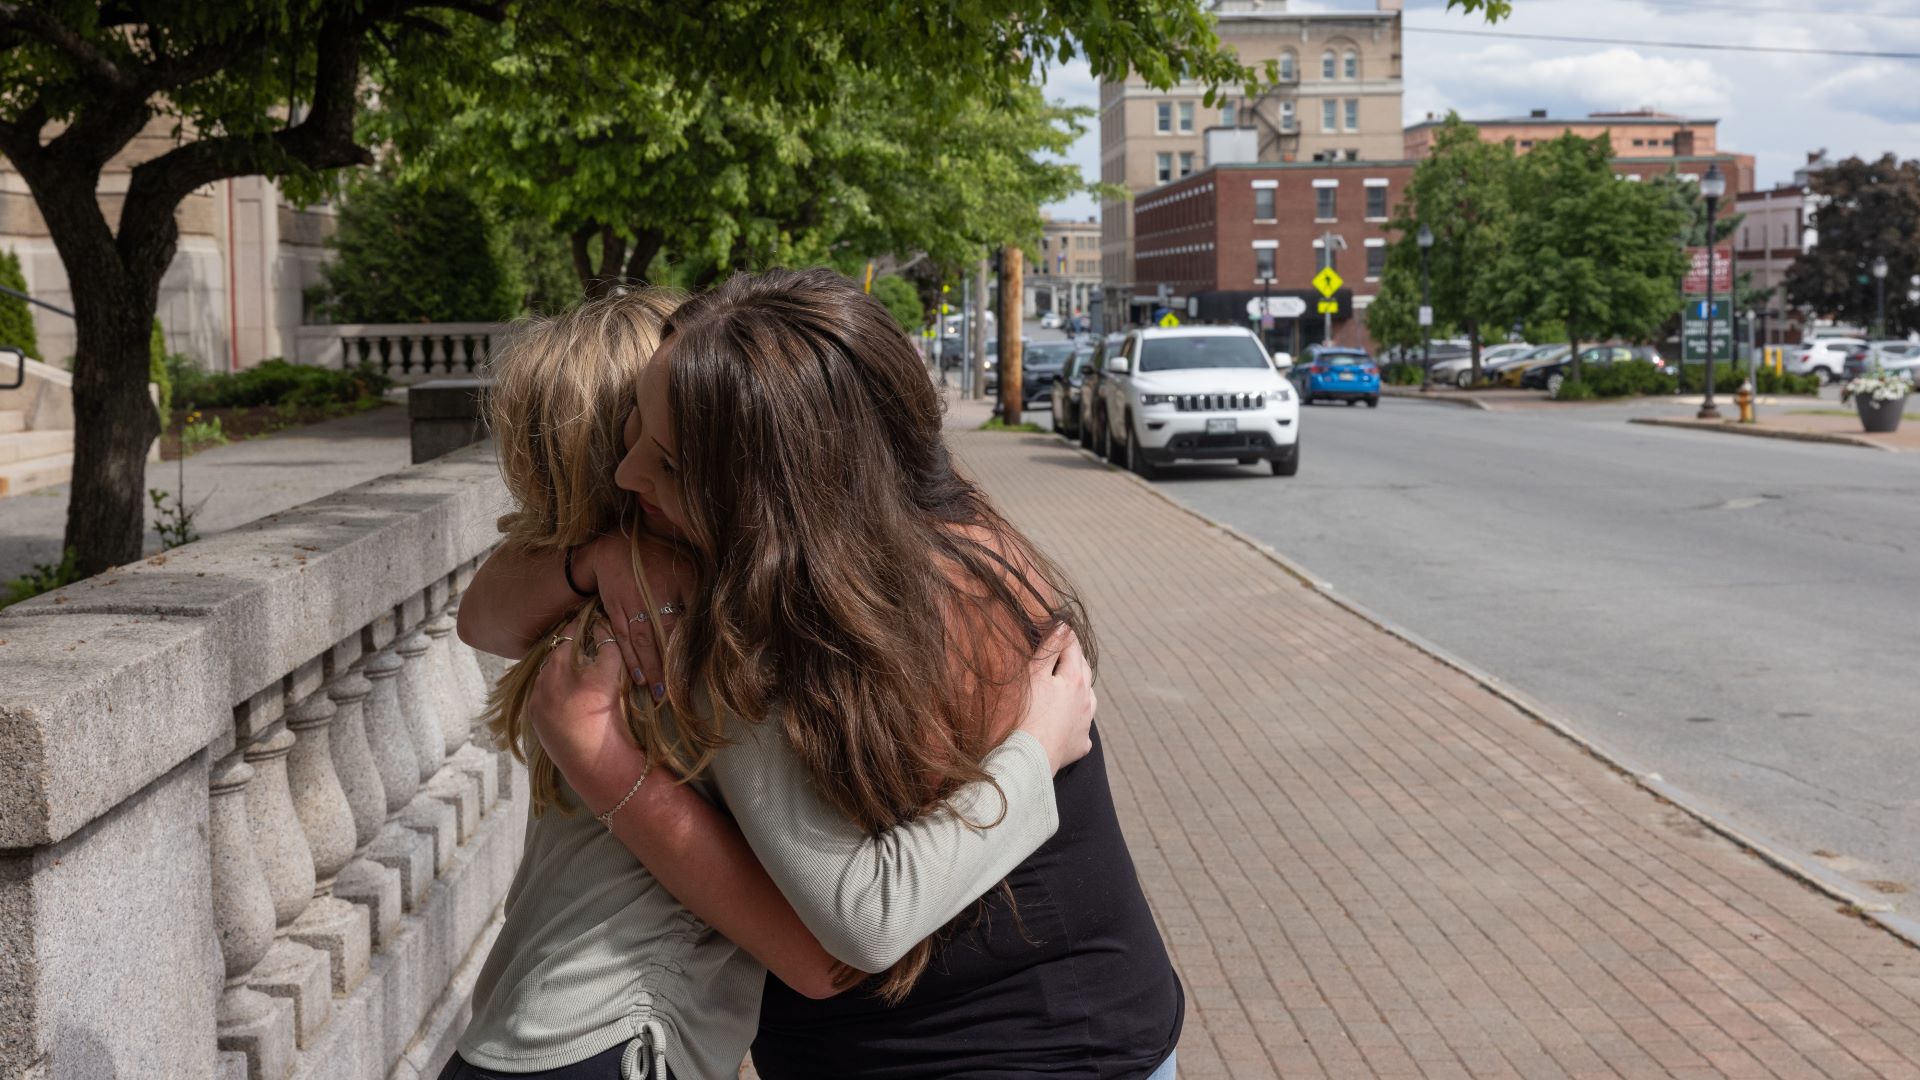 A mother and daughter embrace in a hug while standing on a sidewalk.